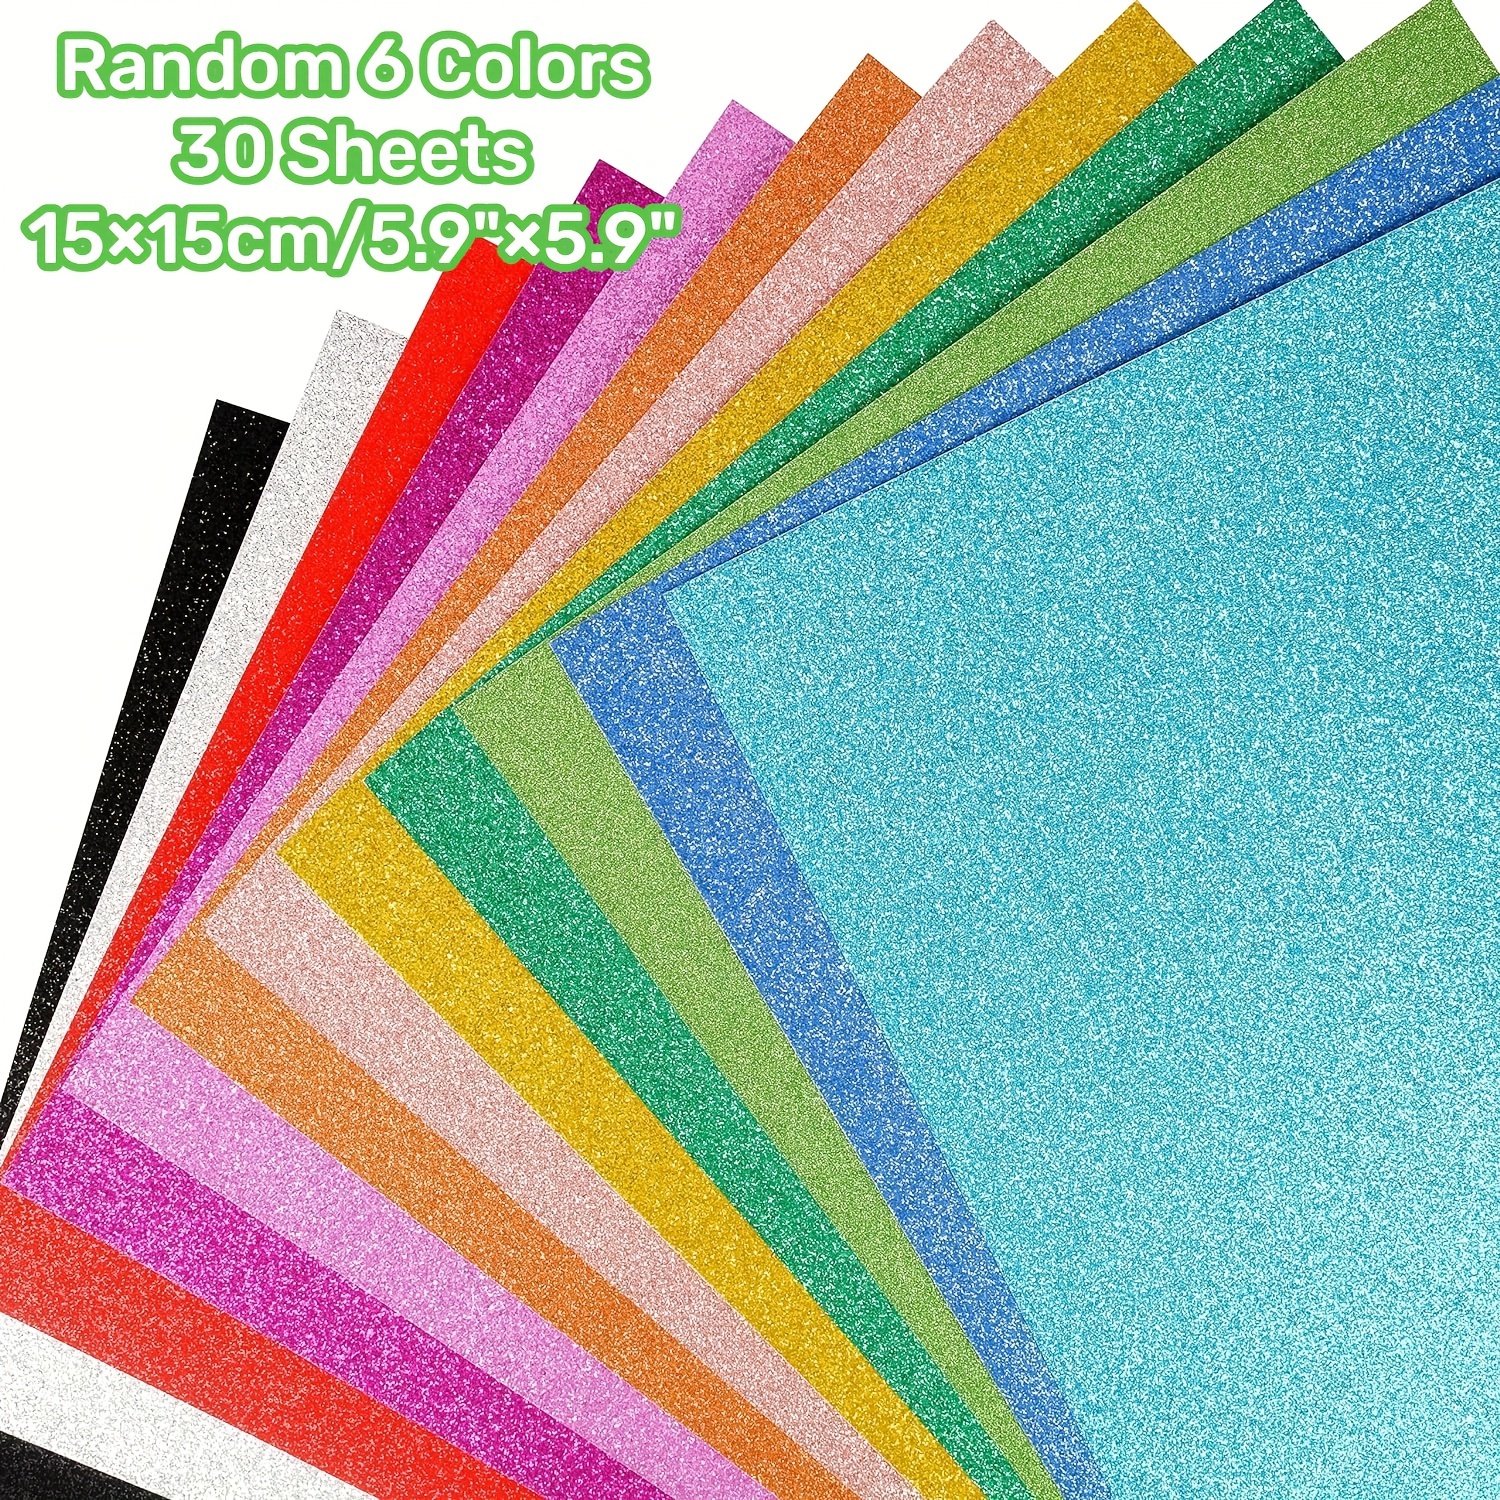 

30 Sheets Glitter Cardstock Paper, Square Random 6 Colors Premium Glitter Paper For Crafts, 250 Gsm Sparkly Card Stock Paper For Card Making, Scrapbooking, Diy Projects